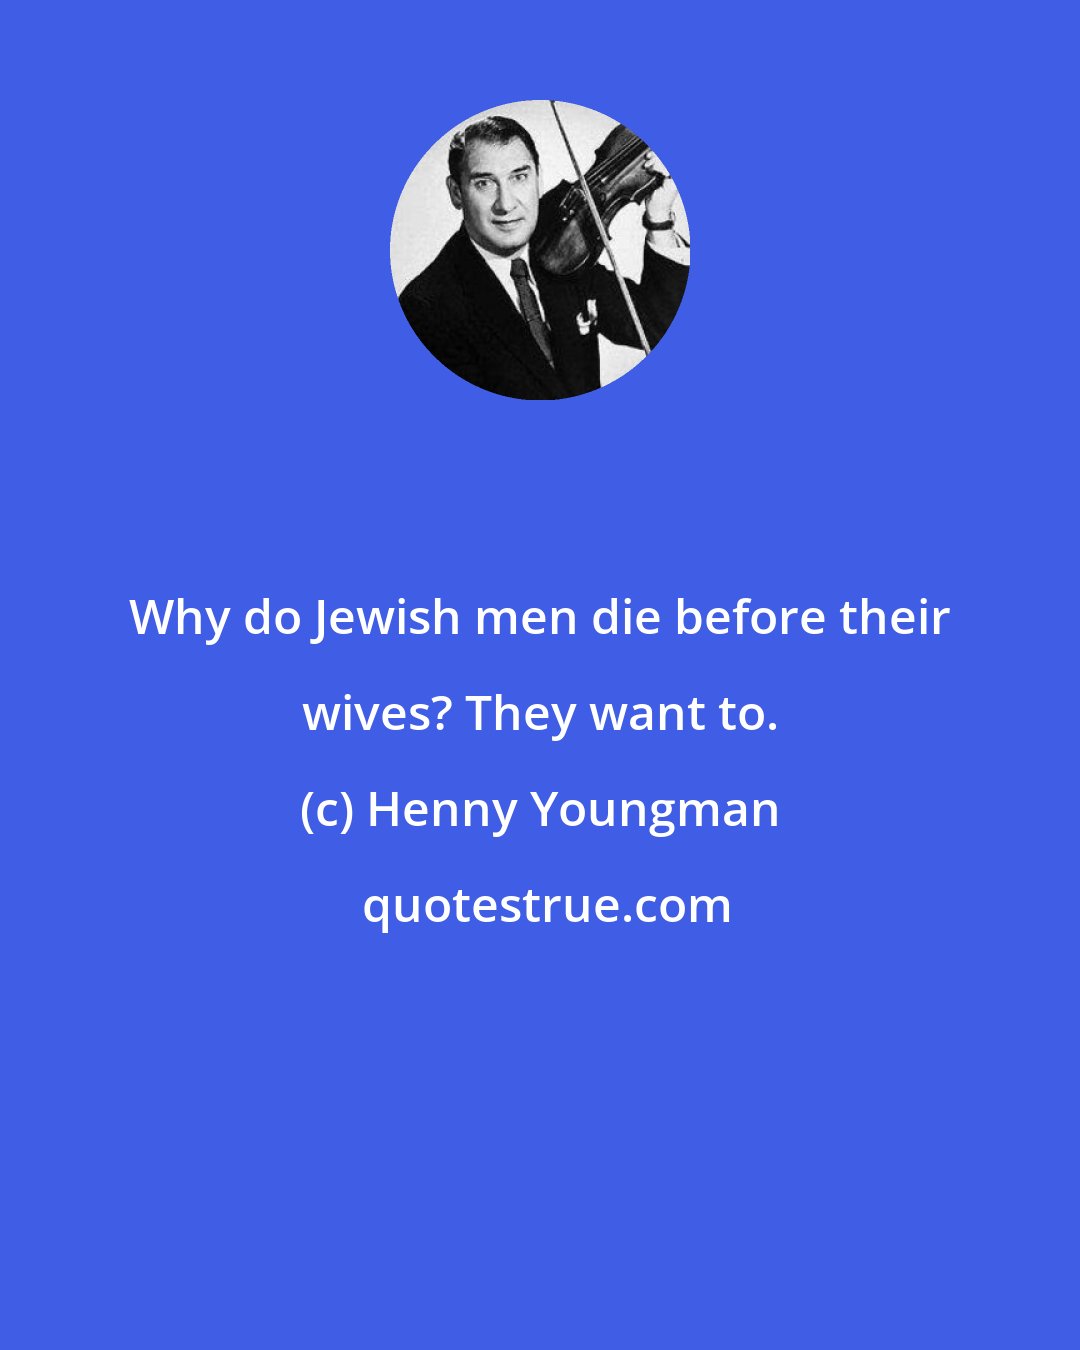 Henny Youngman: Why do Jewish men die before their wives? They want to.